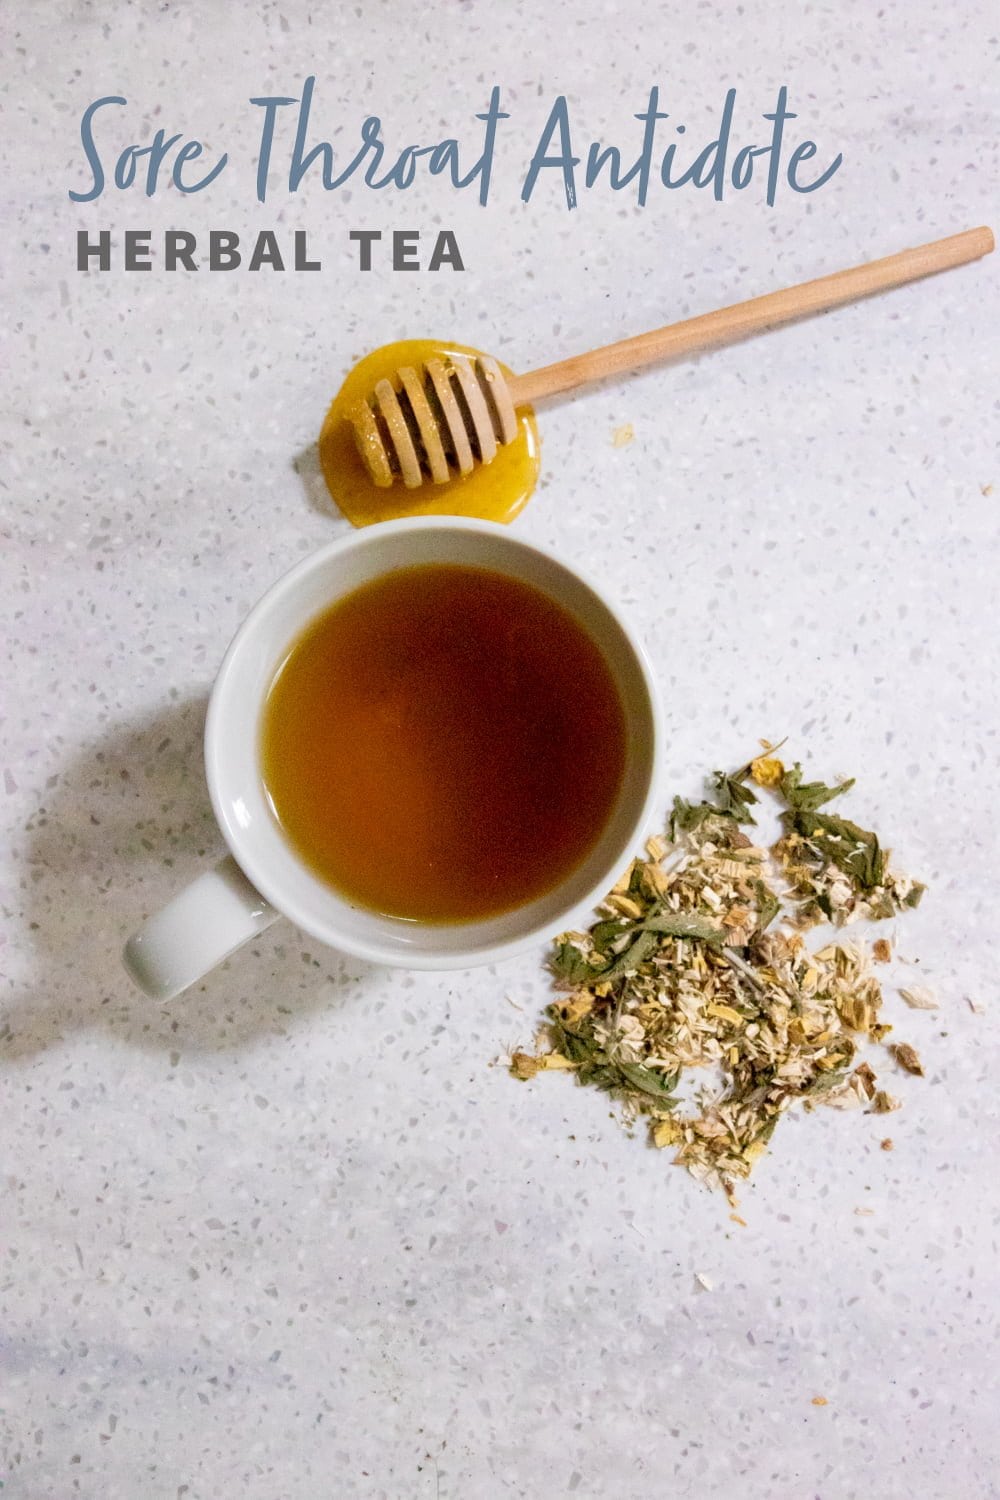 Overhead shot of tea in a white teacup, with herbs and a honey dipper nearby. Text overlay reads "Sore Throat Antidote Herbal Tea."